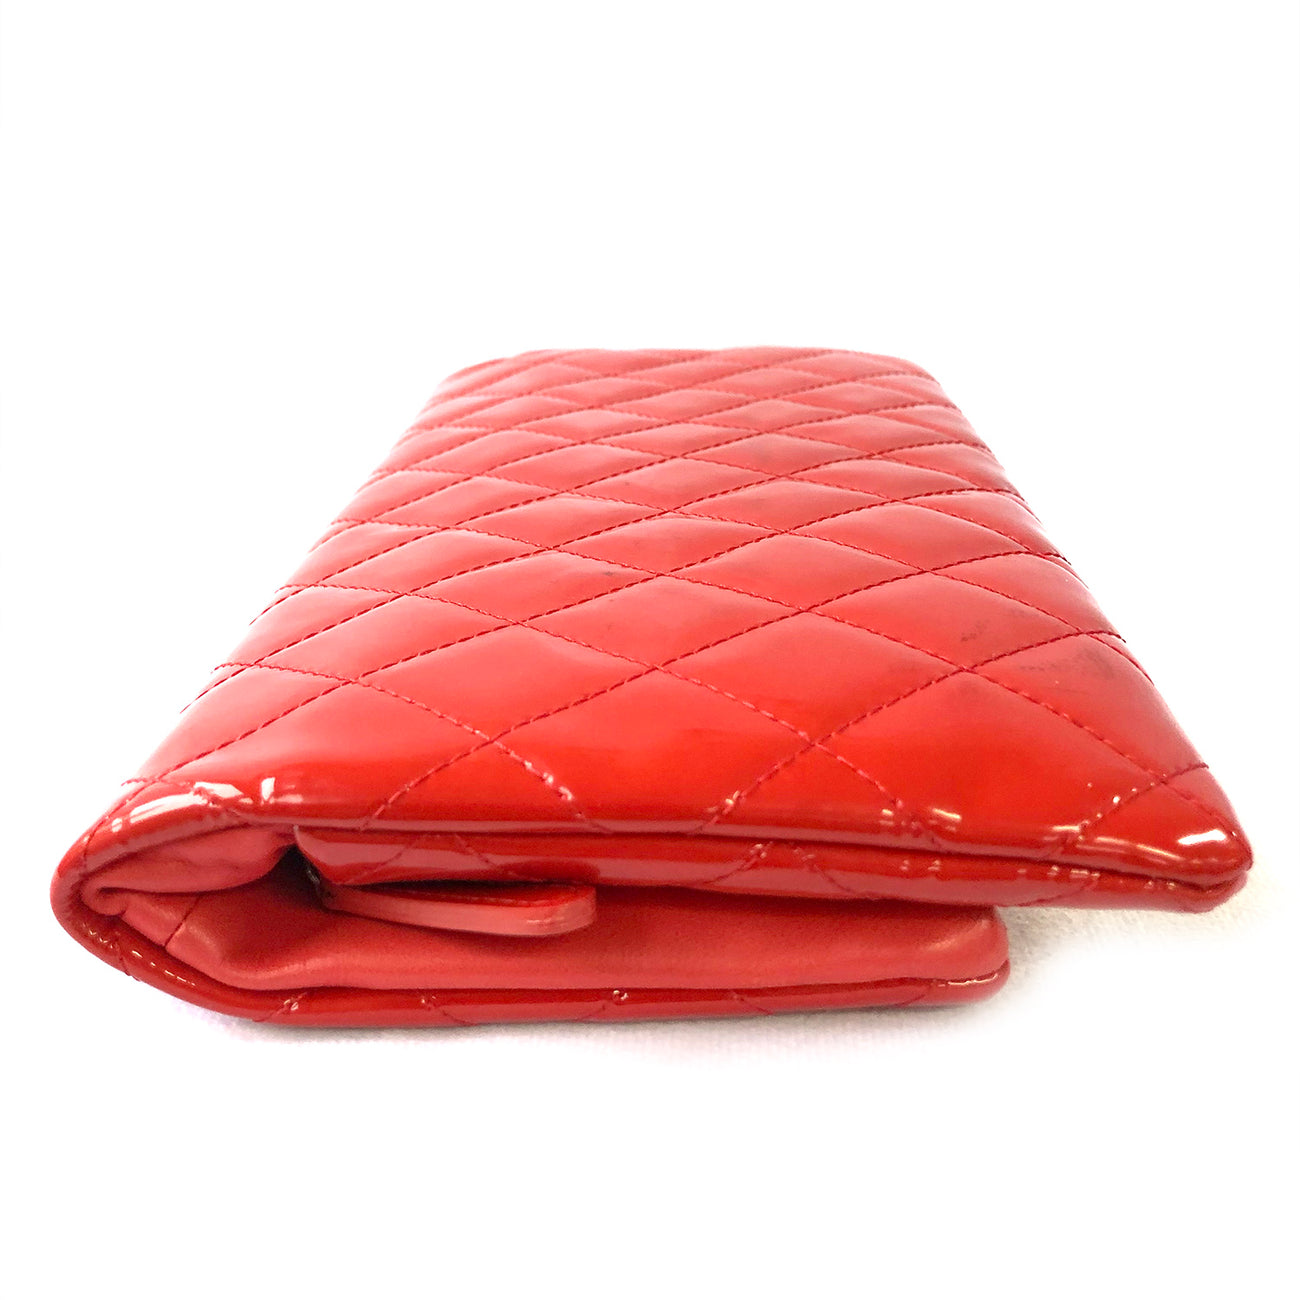 Chanel red patent leather clutch – Loop Generation